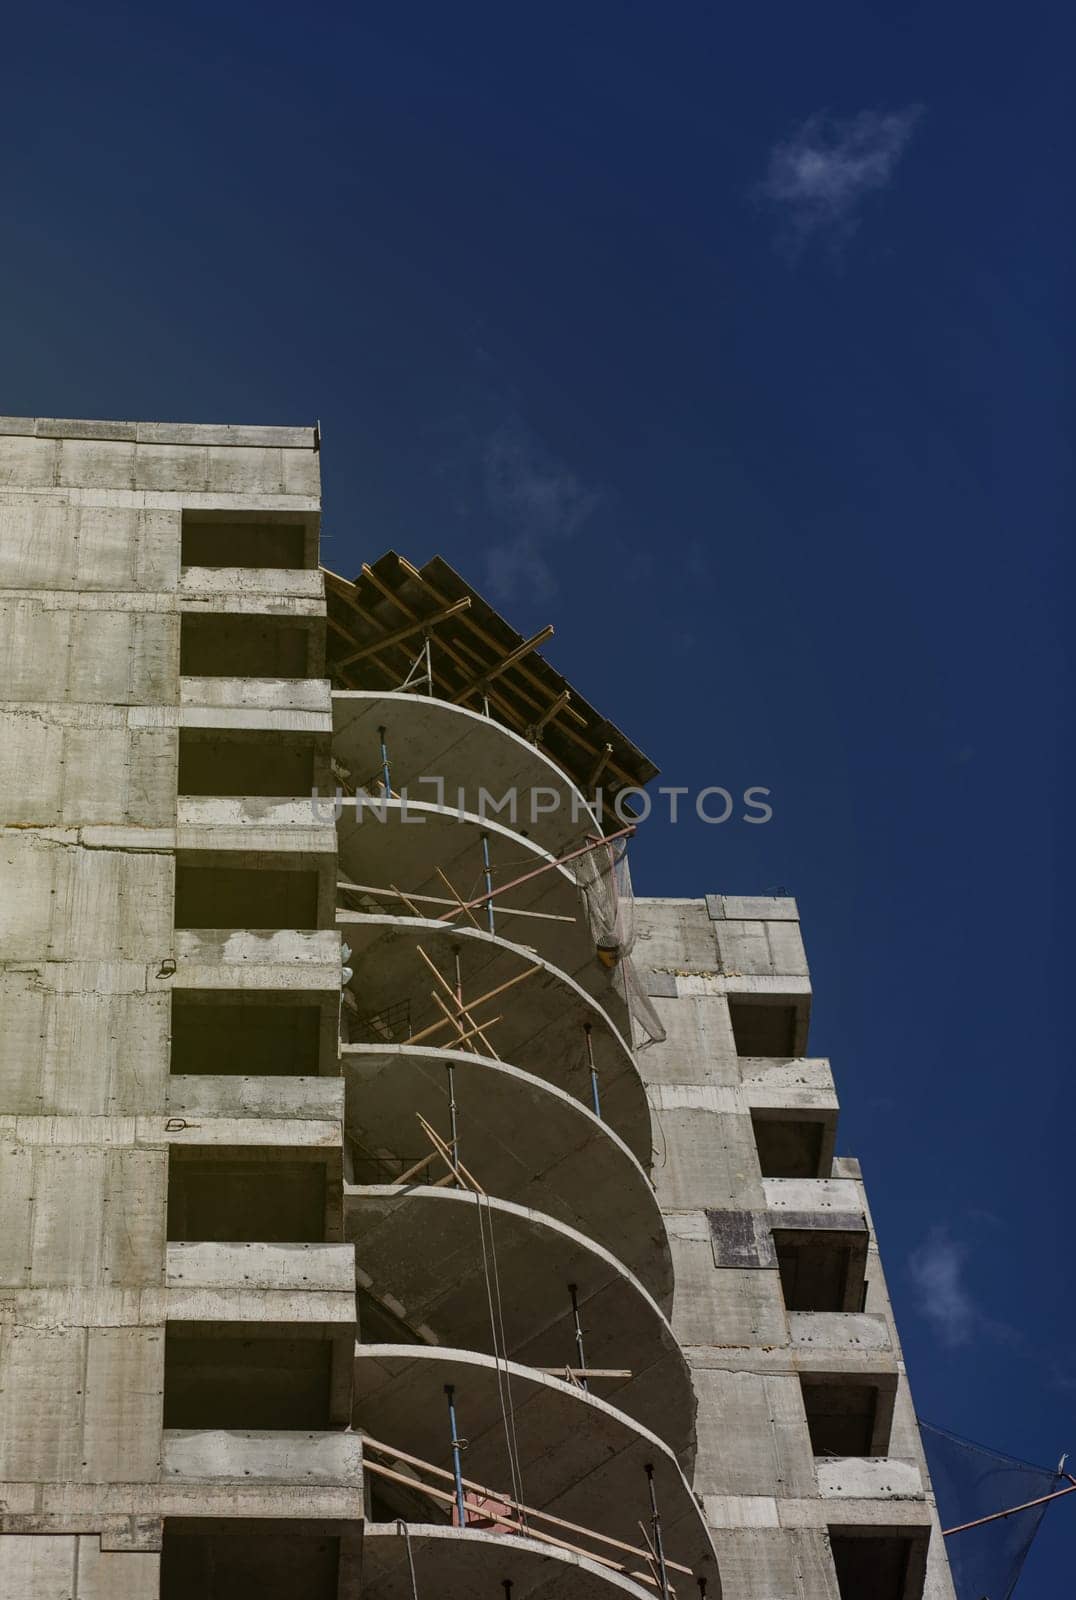 unfinished high-rise building on a construction site. The new building is being built against a blue sky. Mortgage